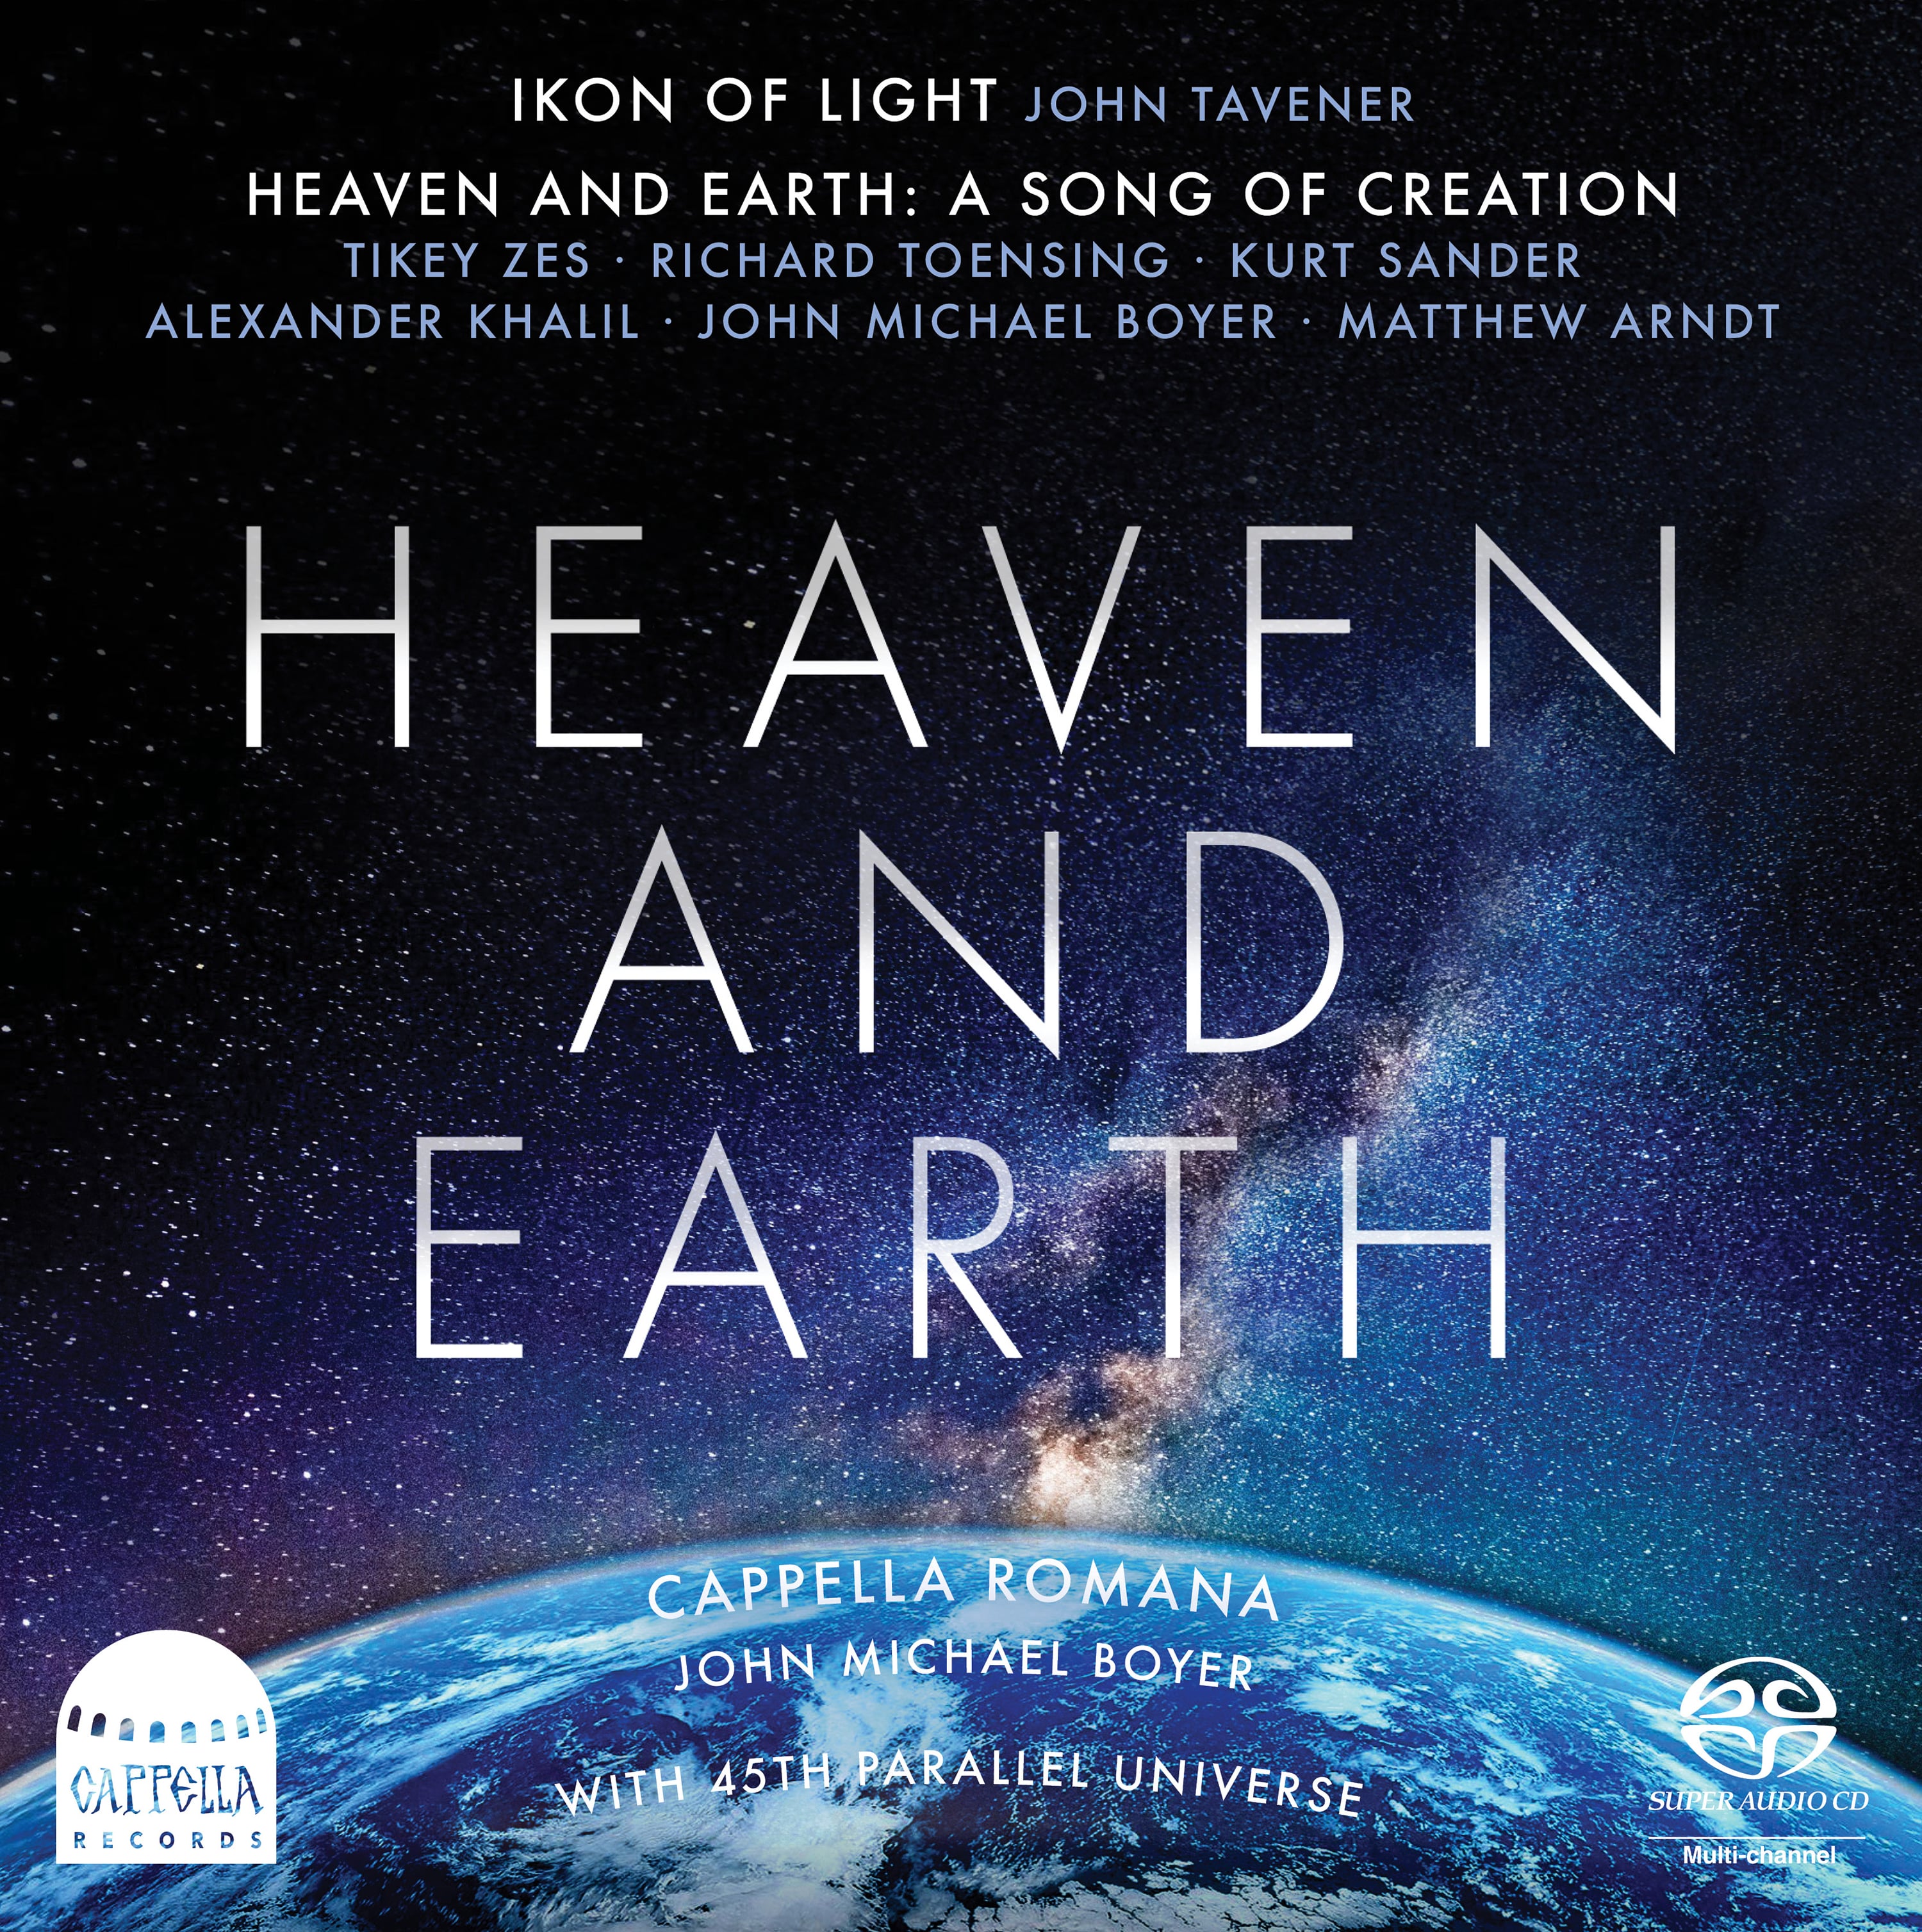 Cappella Records Announces “Heaven and Earth” Release on October 14, 2022